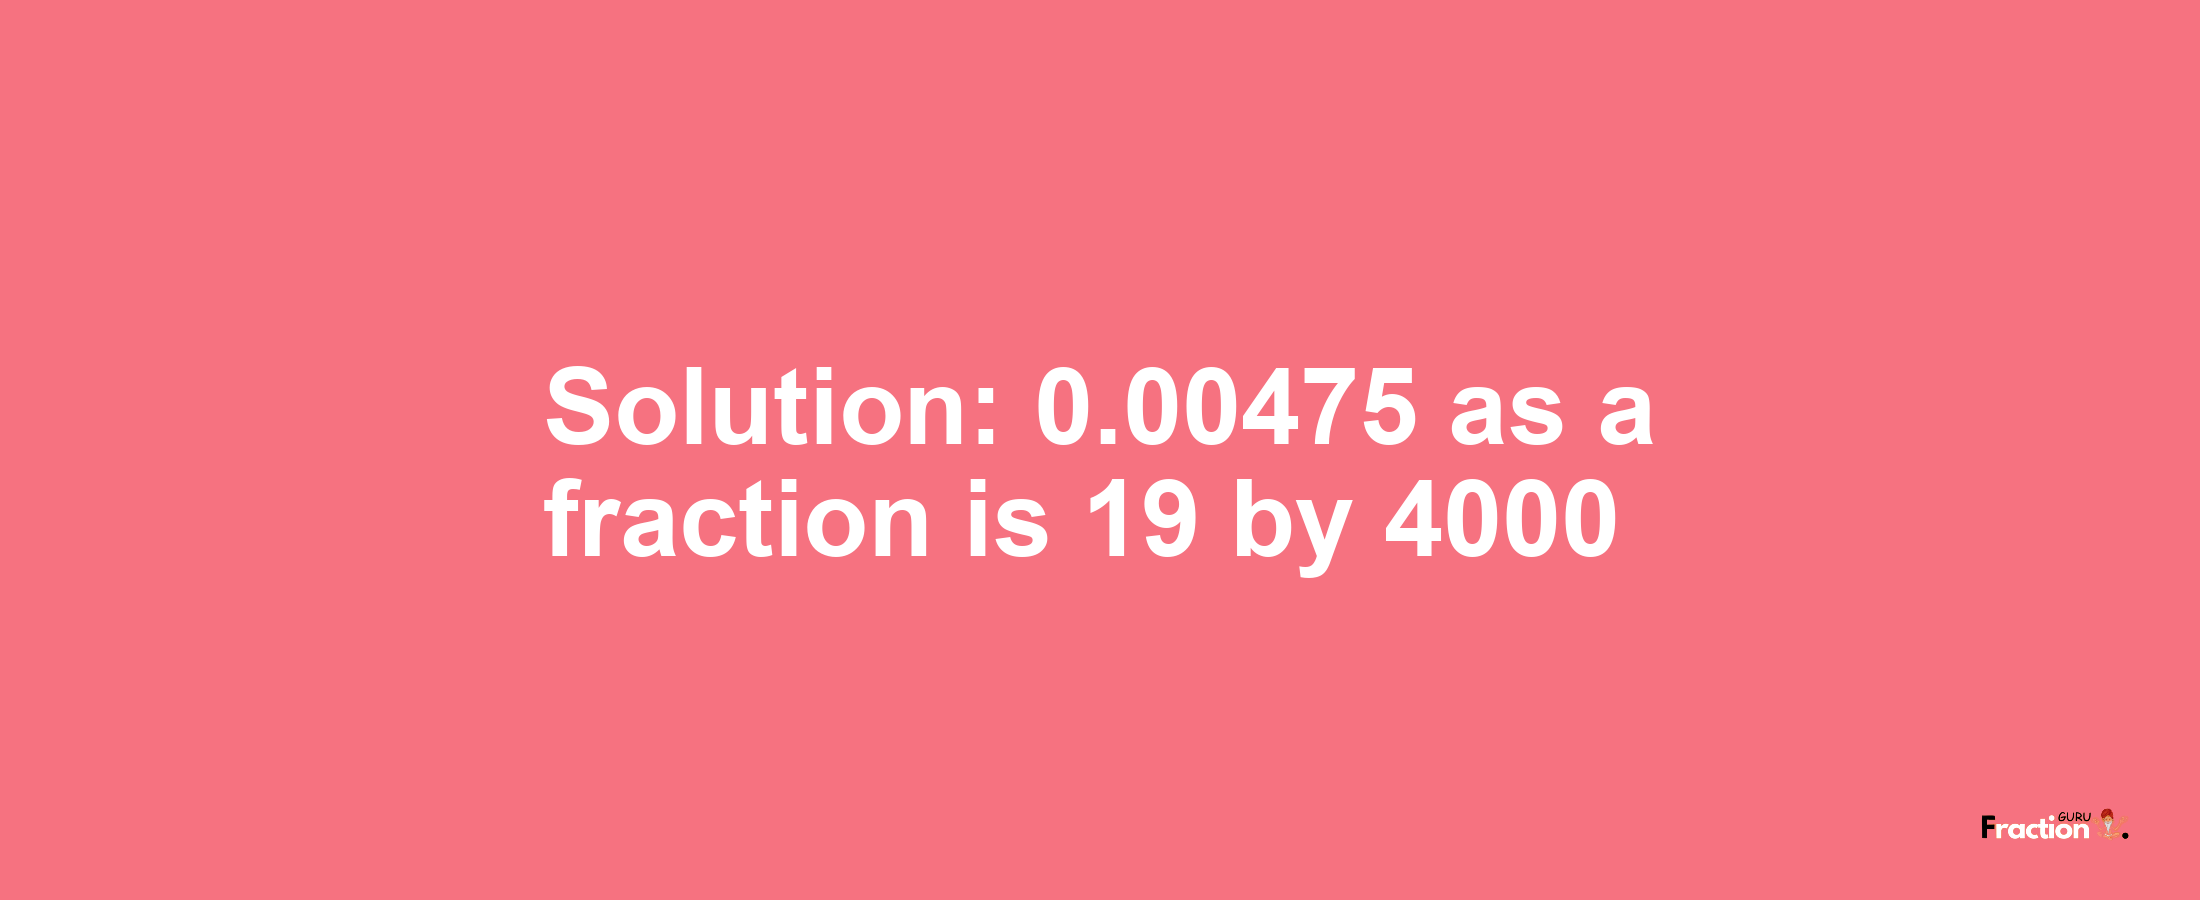 Solution:0.00475 as a fraction is 19/4000